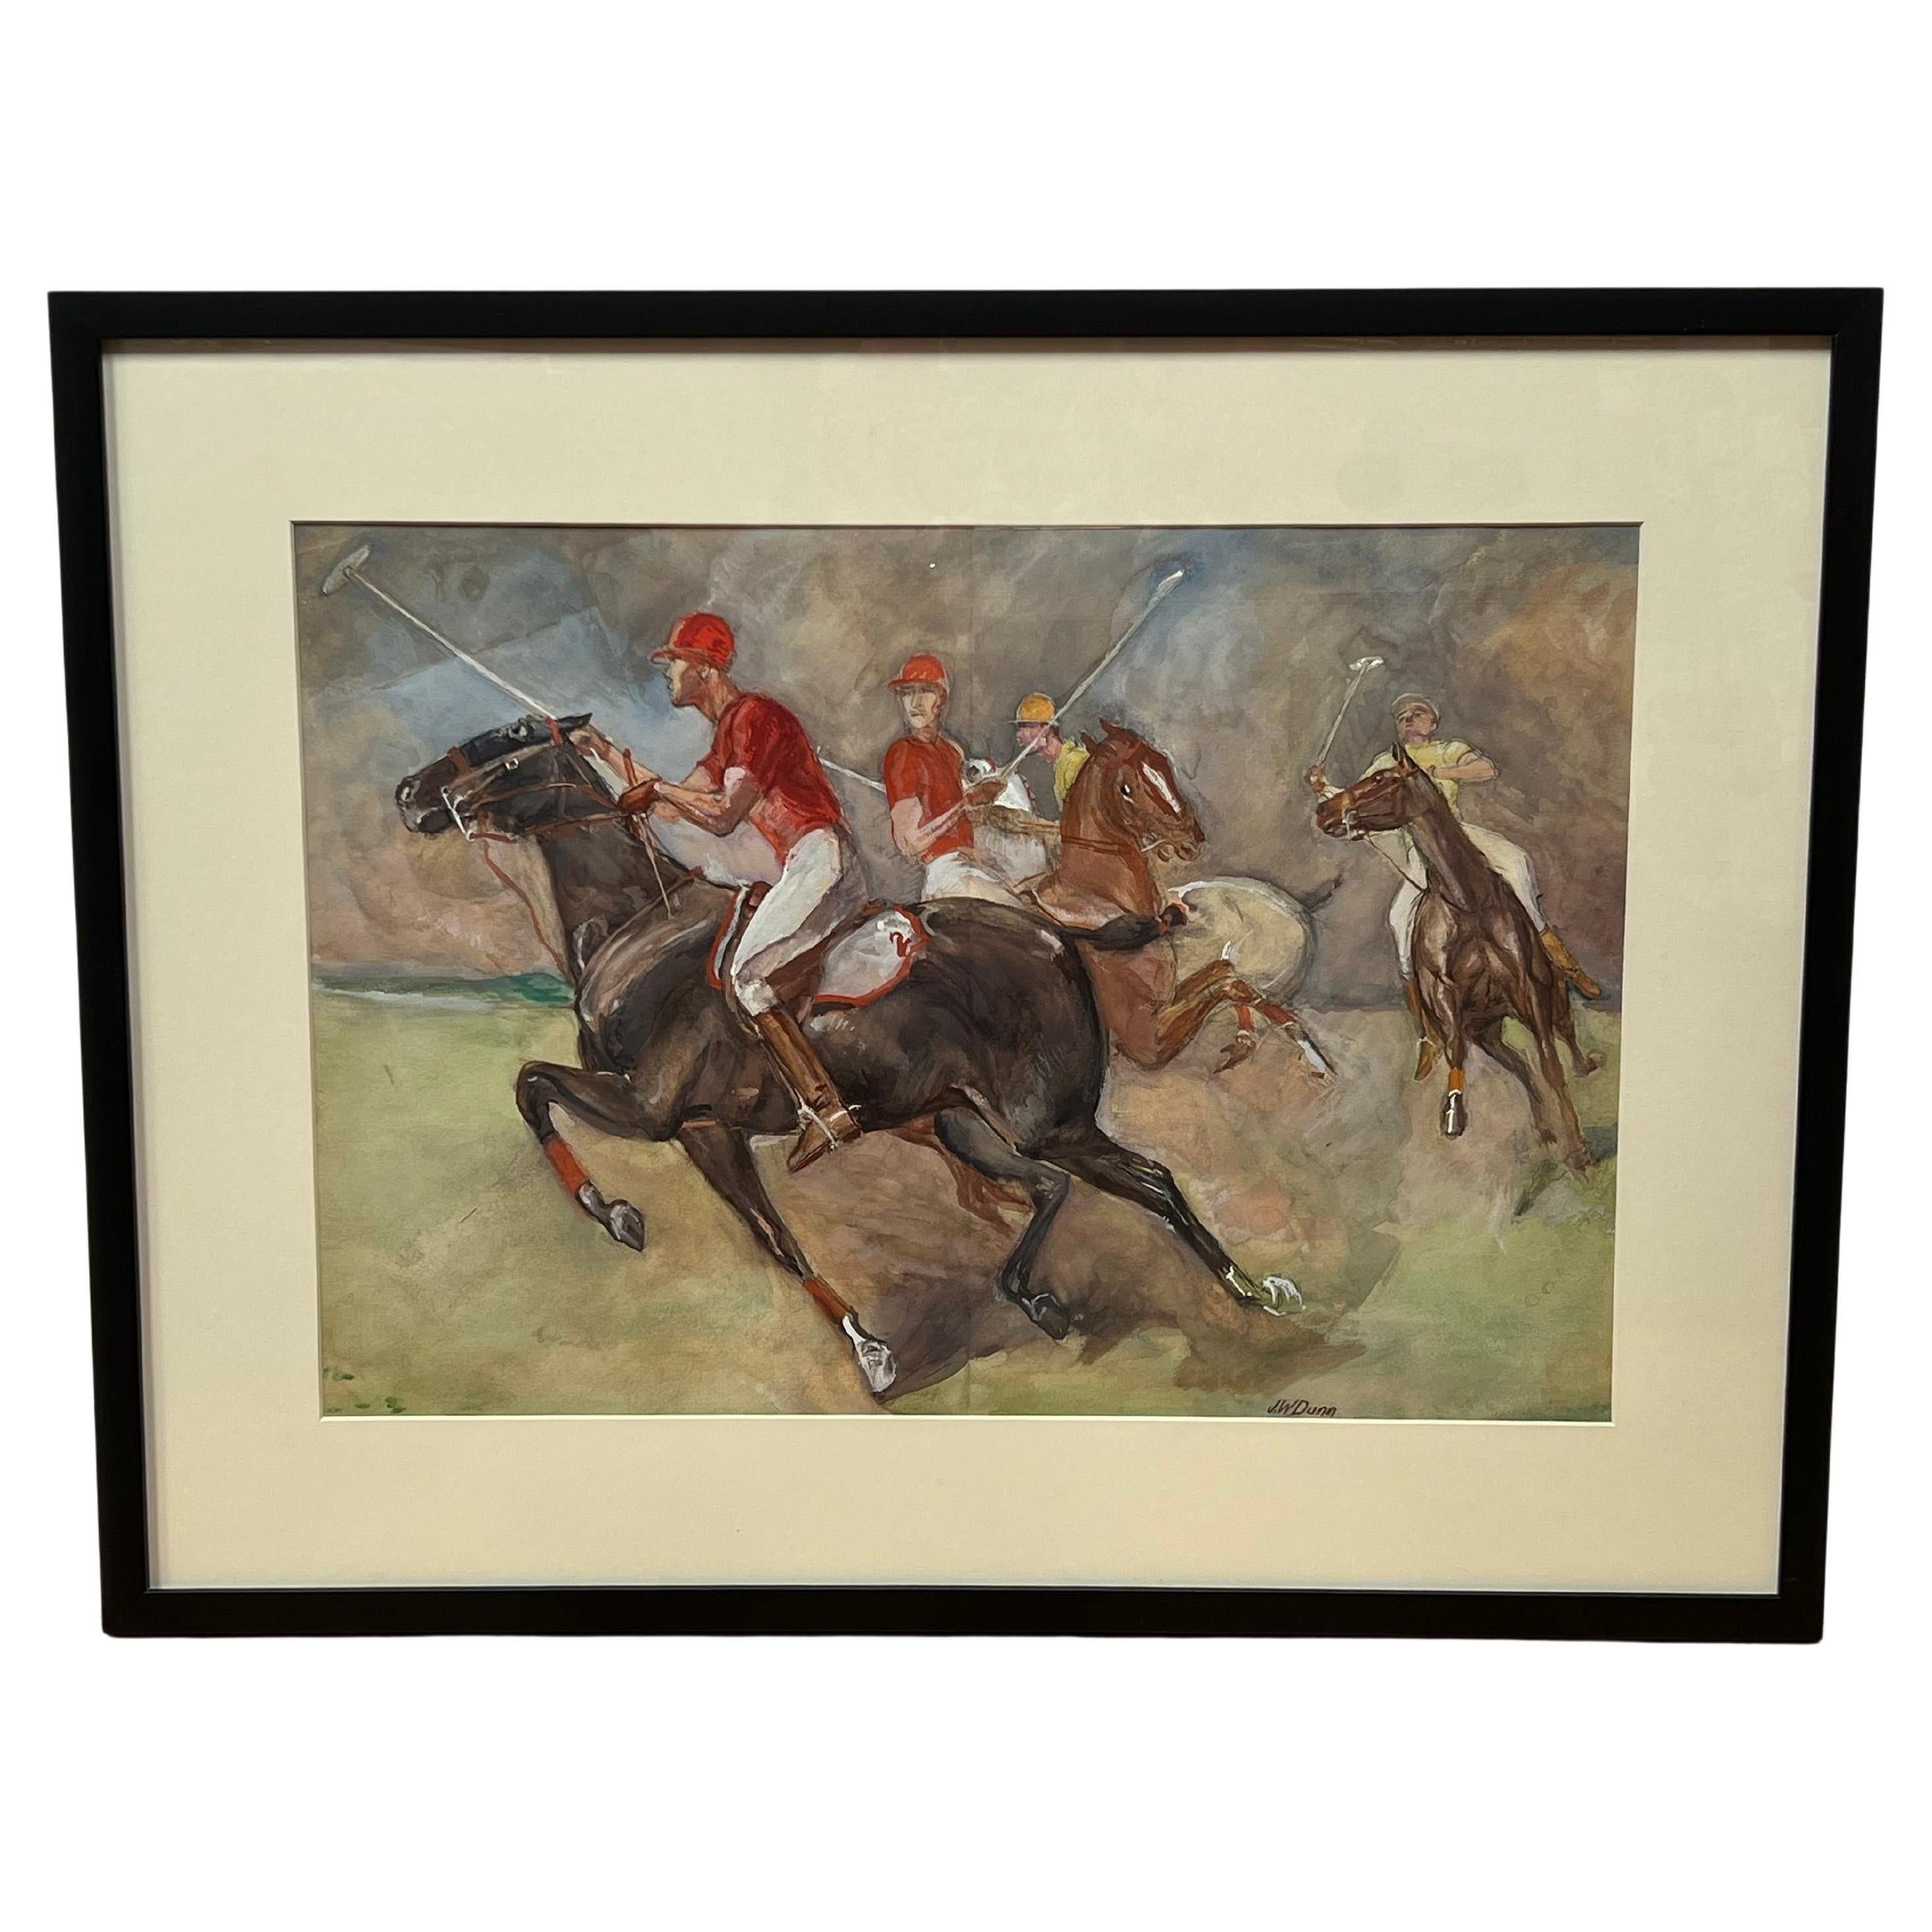 This framed watercolor  is signed lower right by the American artist J.W. Dunn.

It depicts a thrilling equestrian polo match from the 1930s, featuring four riders in traditional polo uniforms. One team is dressed in red attire, while the other